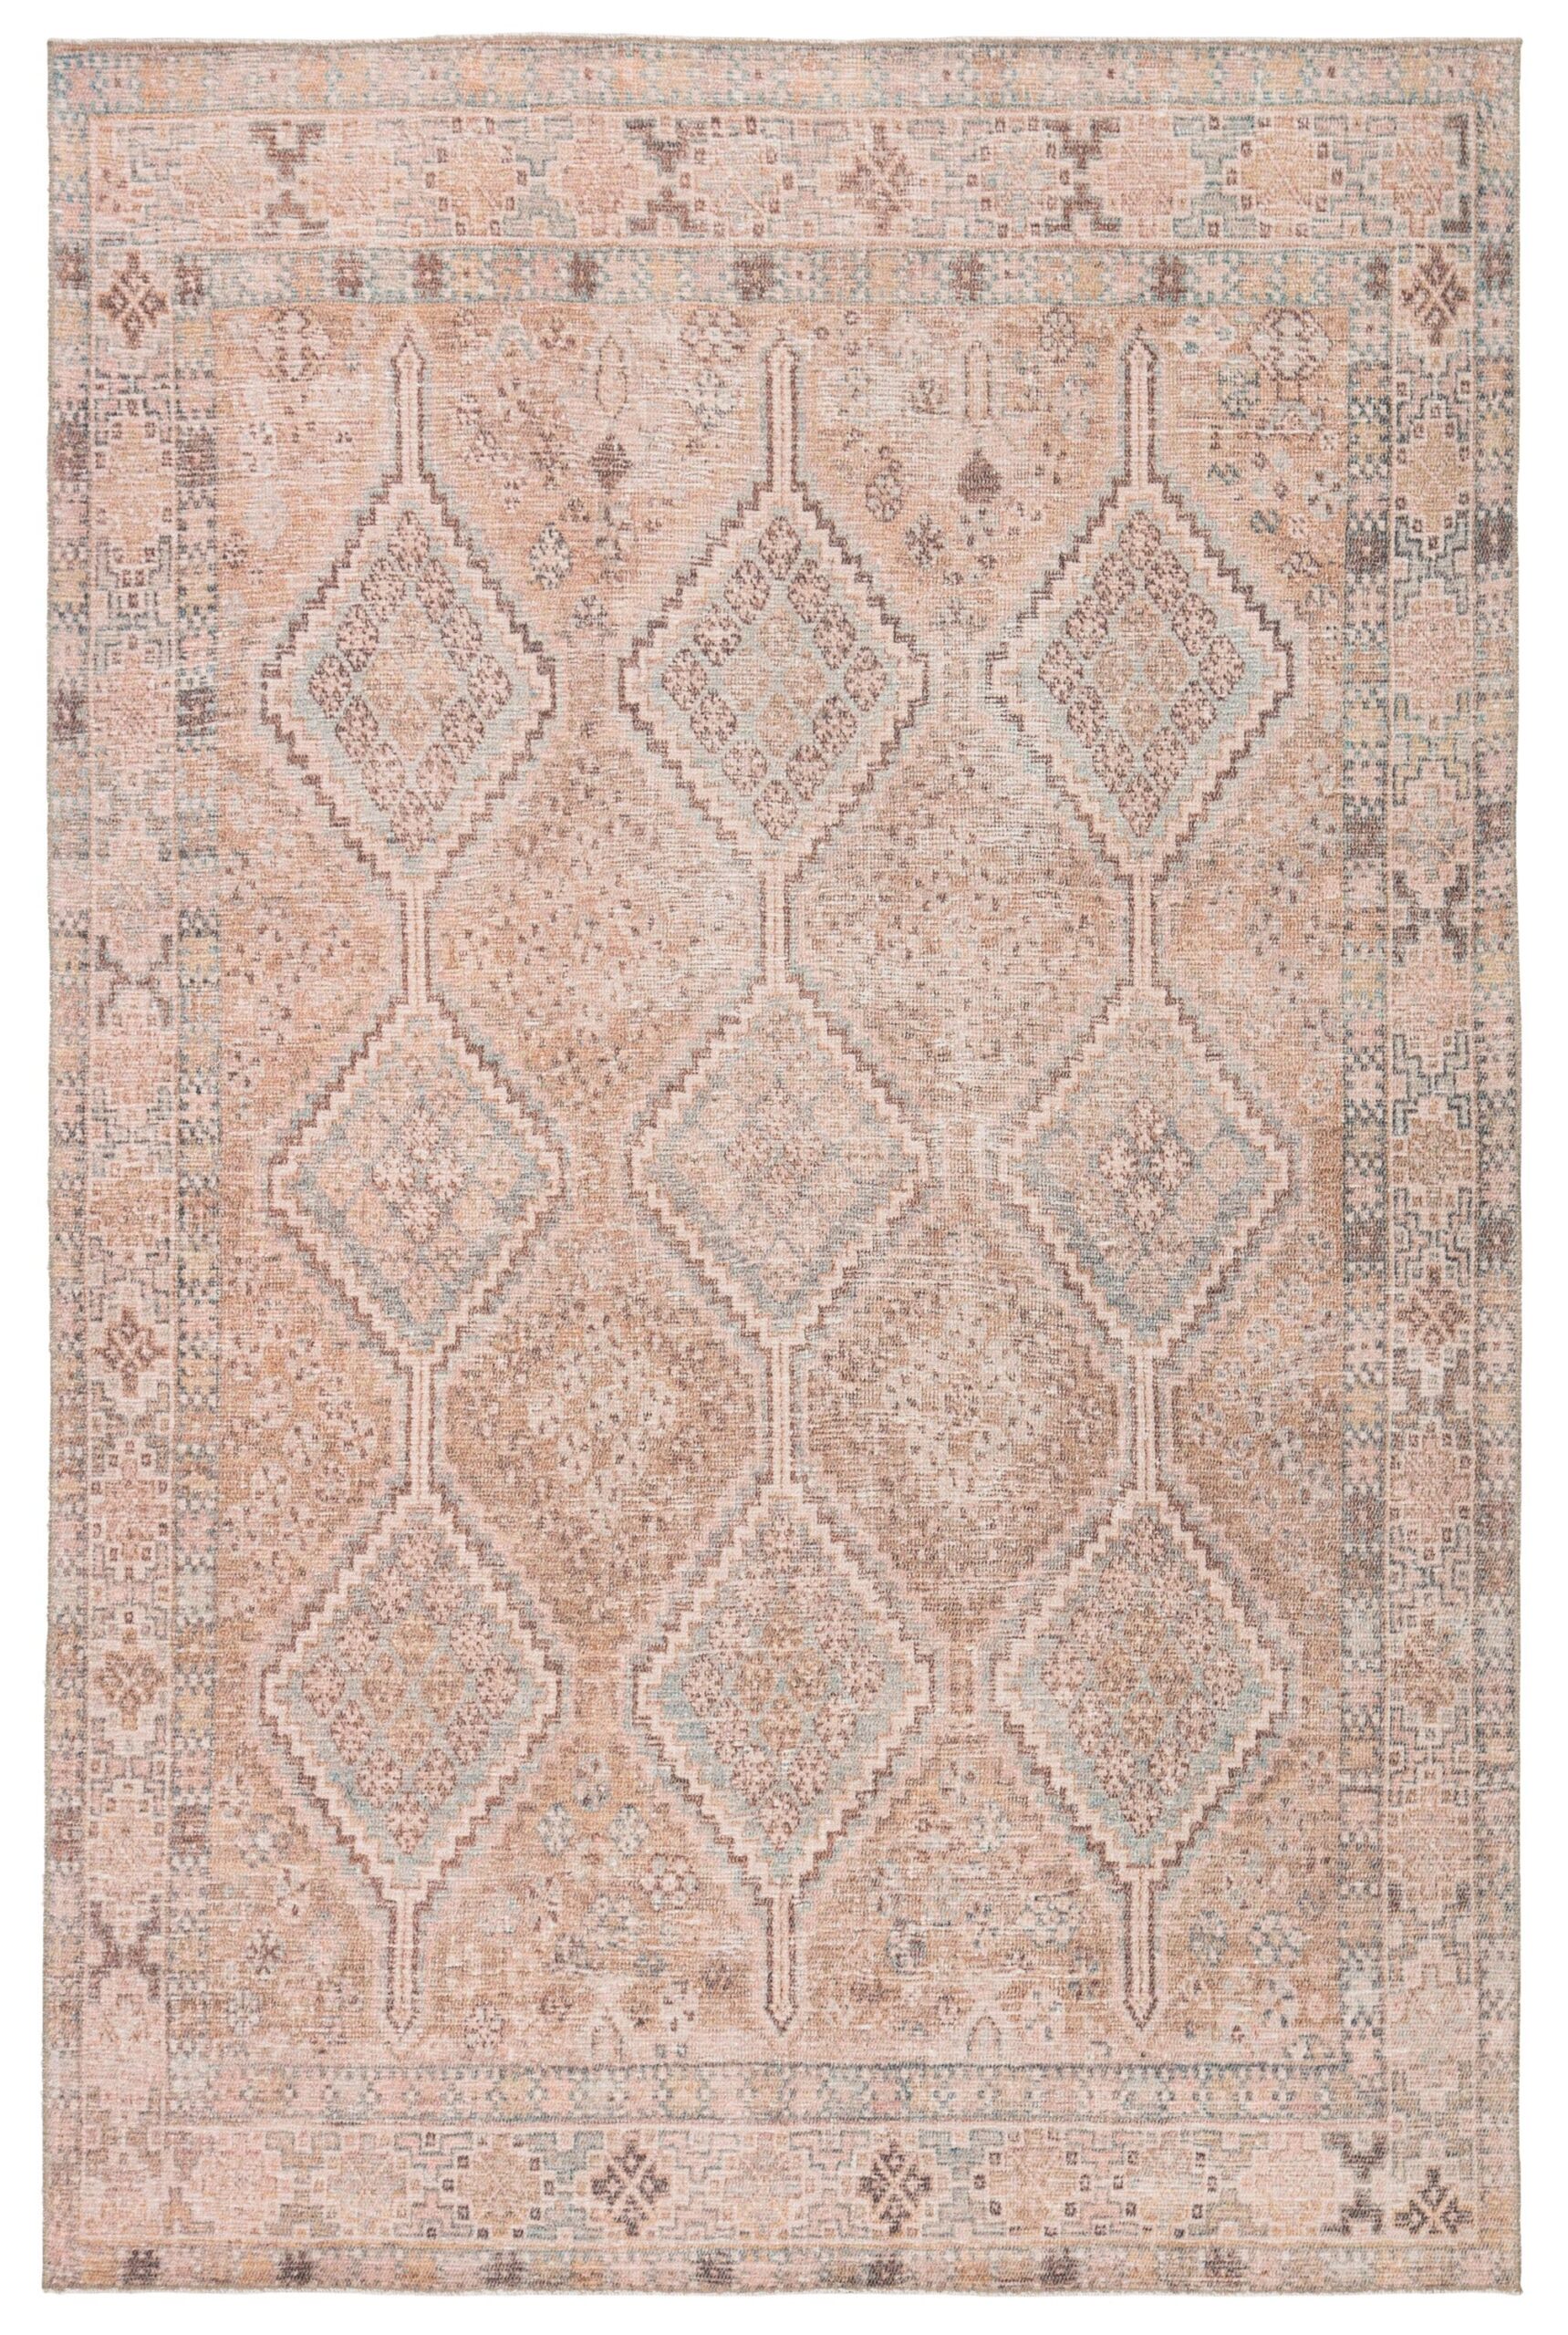 The Timeless Elegance of a Pink Area Rug